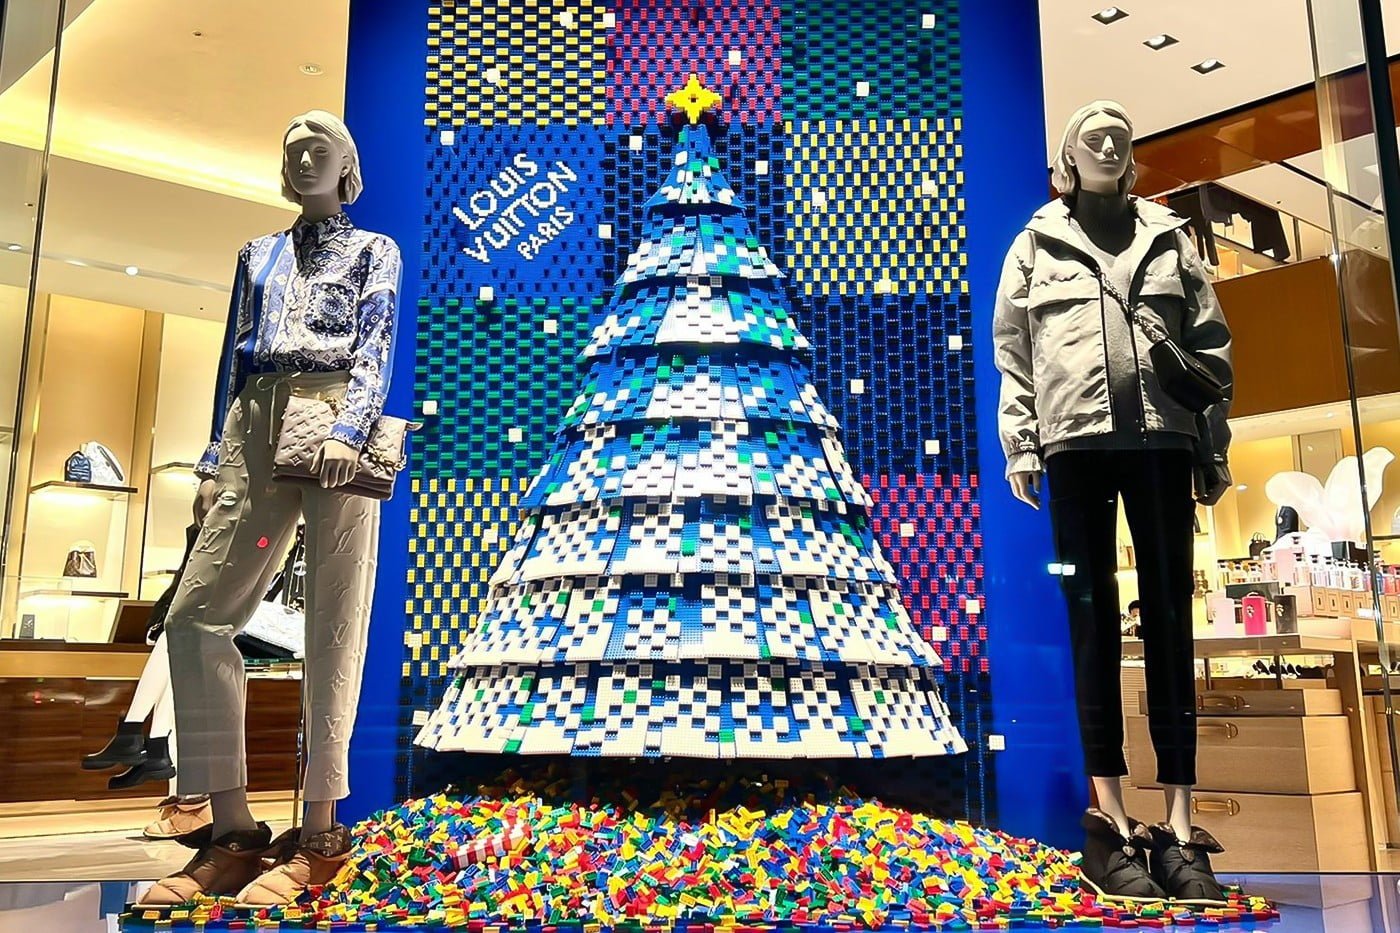 Forget the window display, THIS is the Louis Vuitton / LEGO mashup we need!  - The Brothers Brick